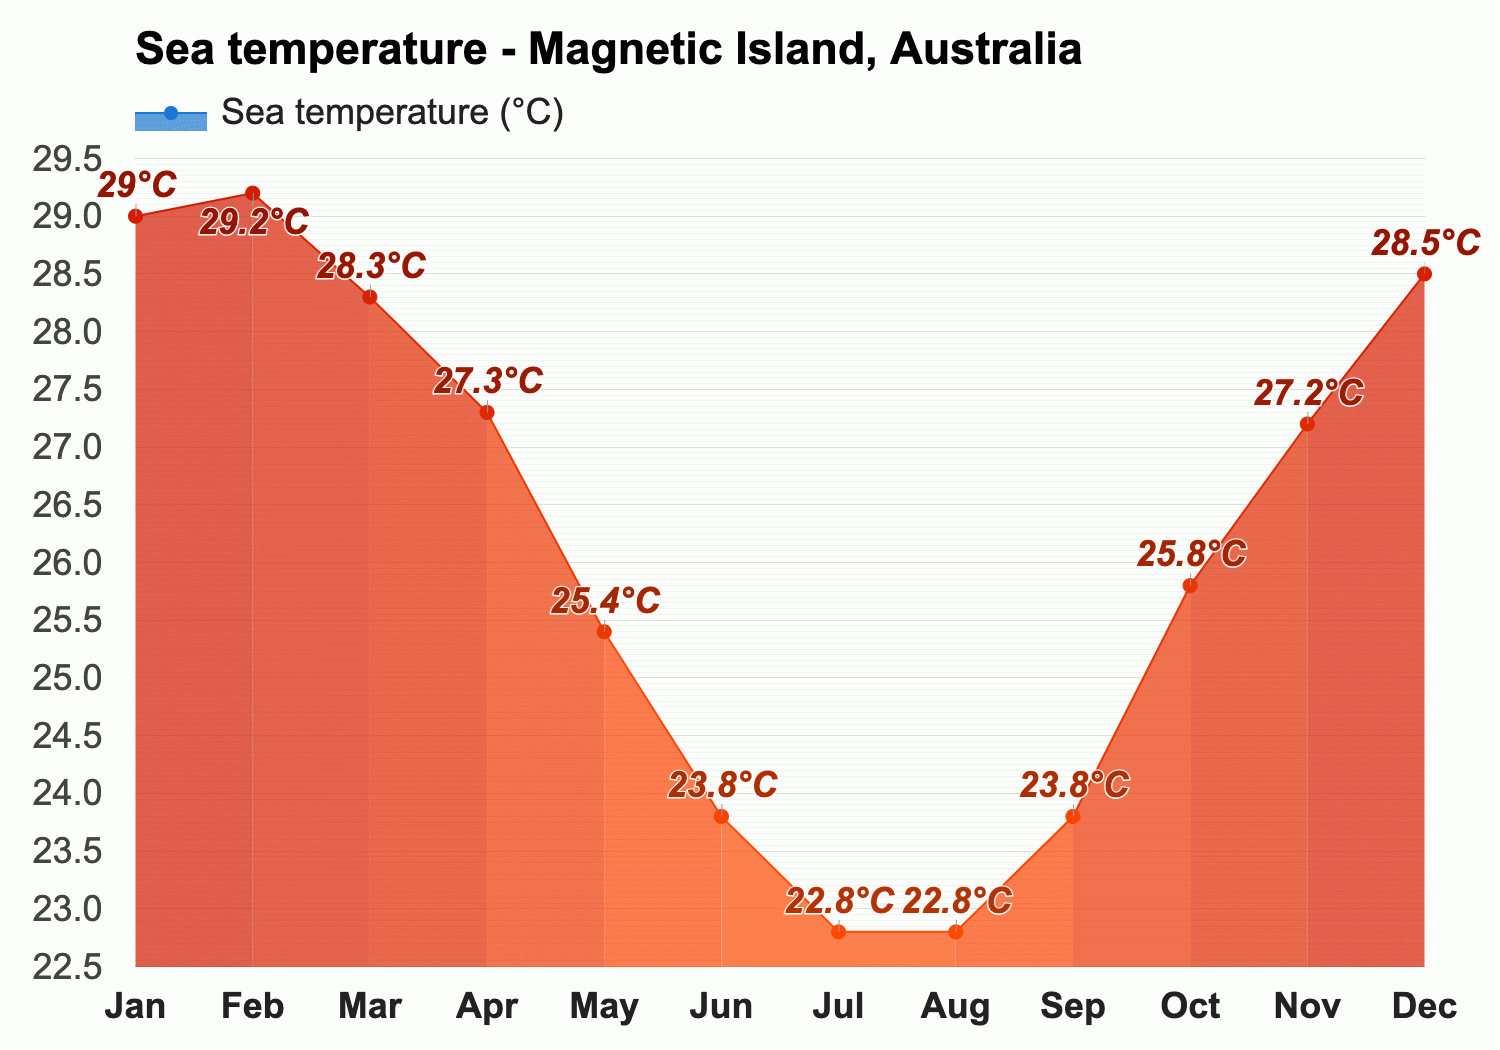 March - Autumn forecast - Magnetic Island,